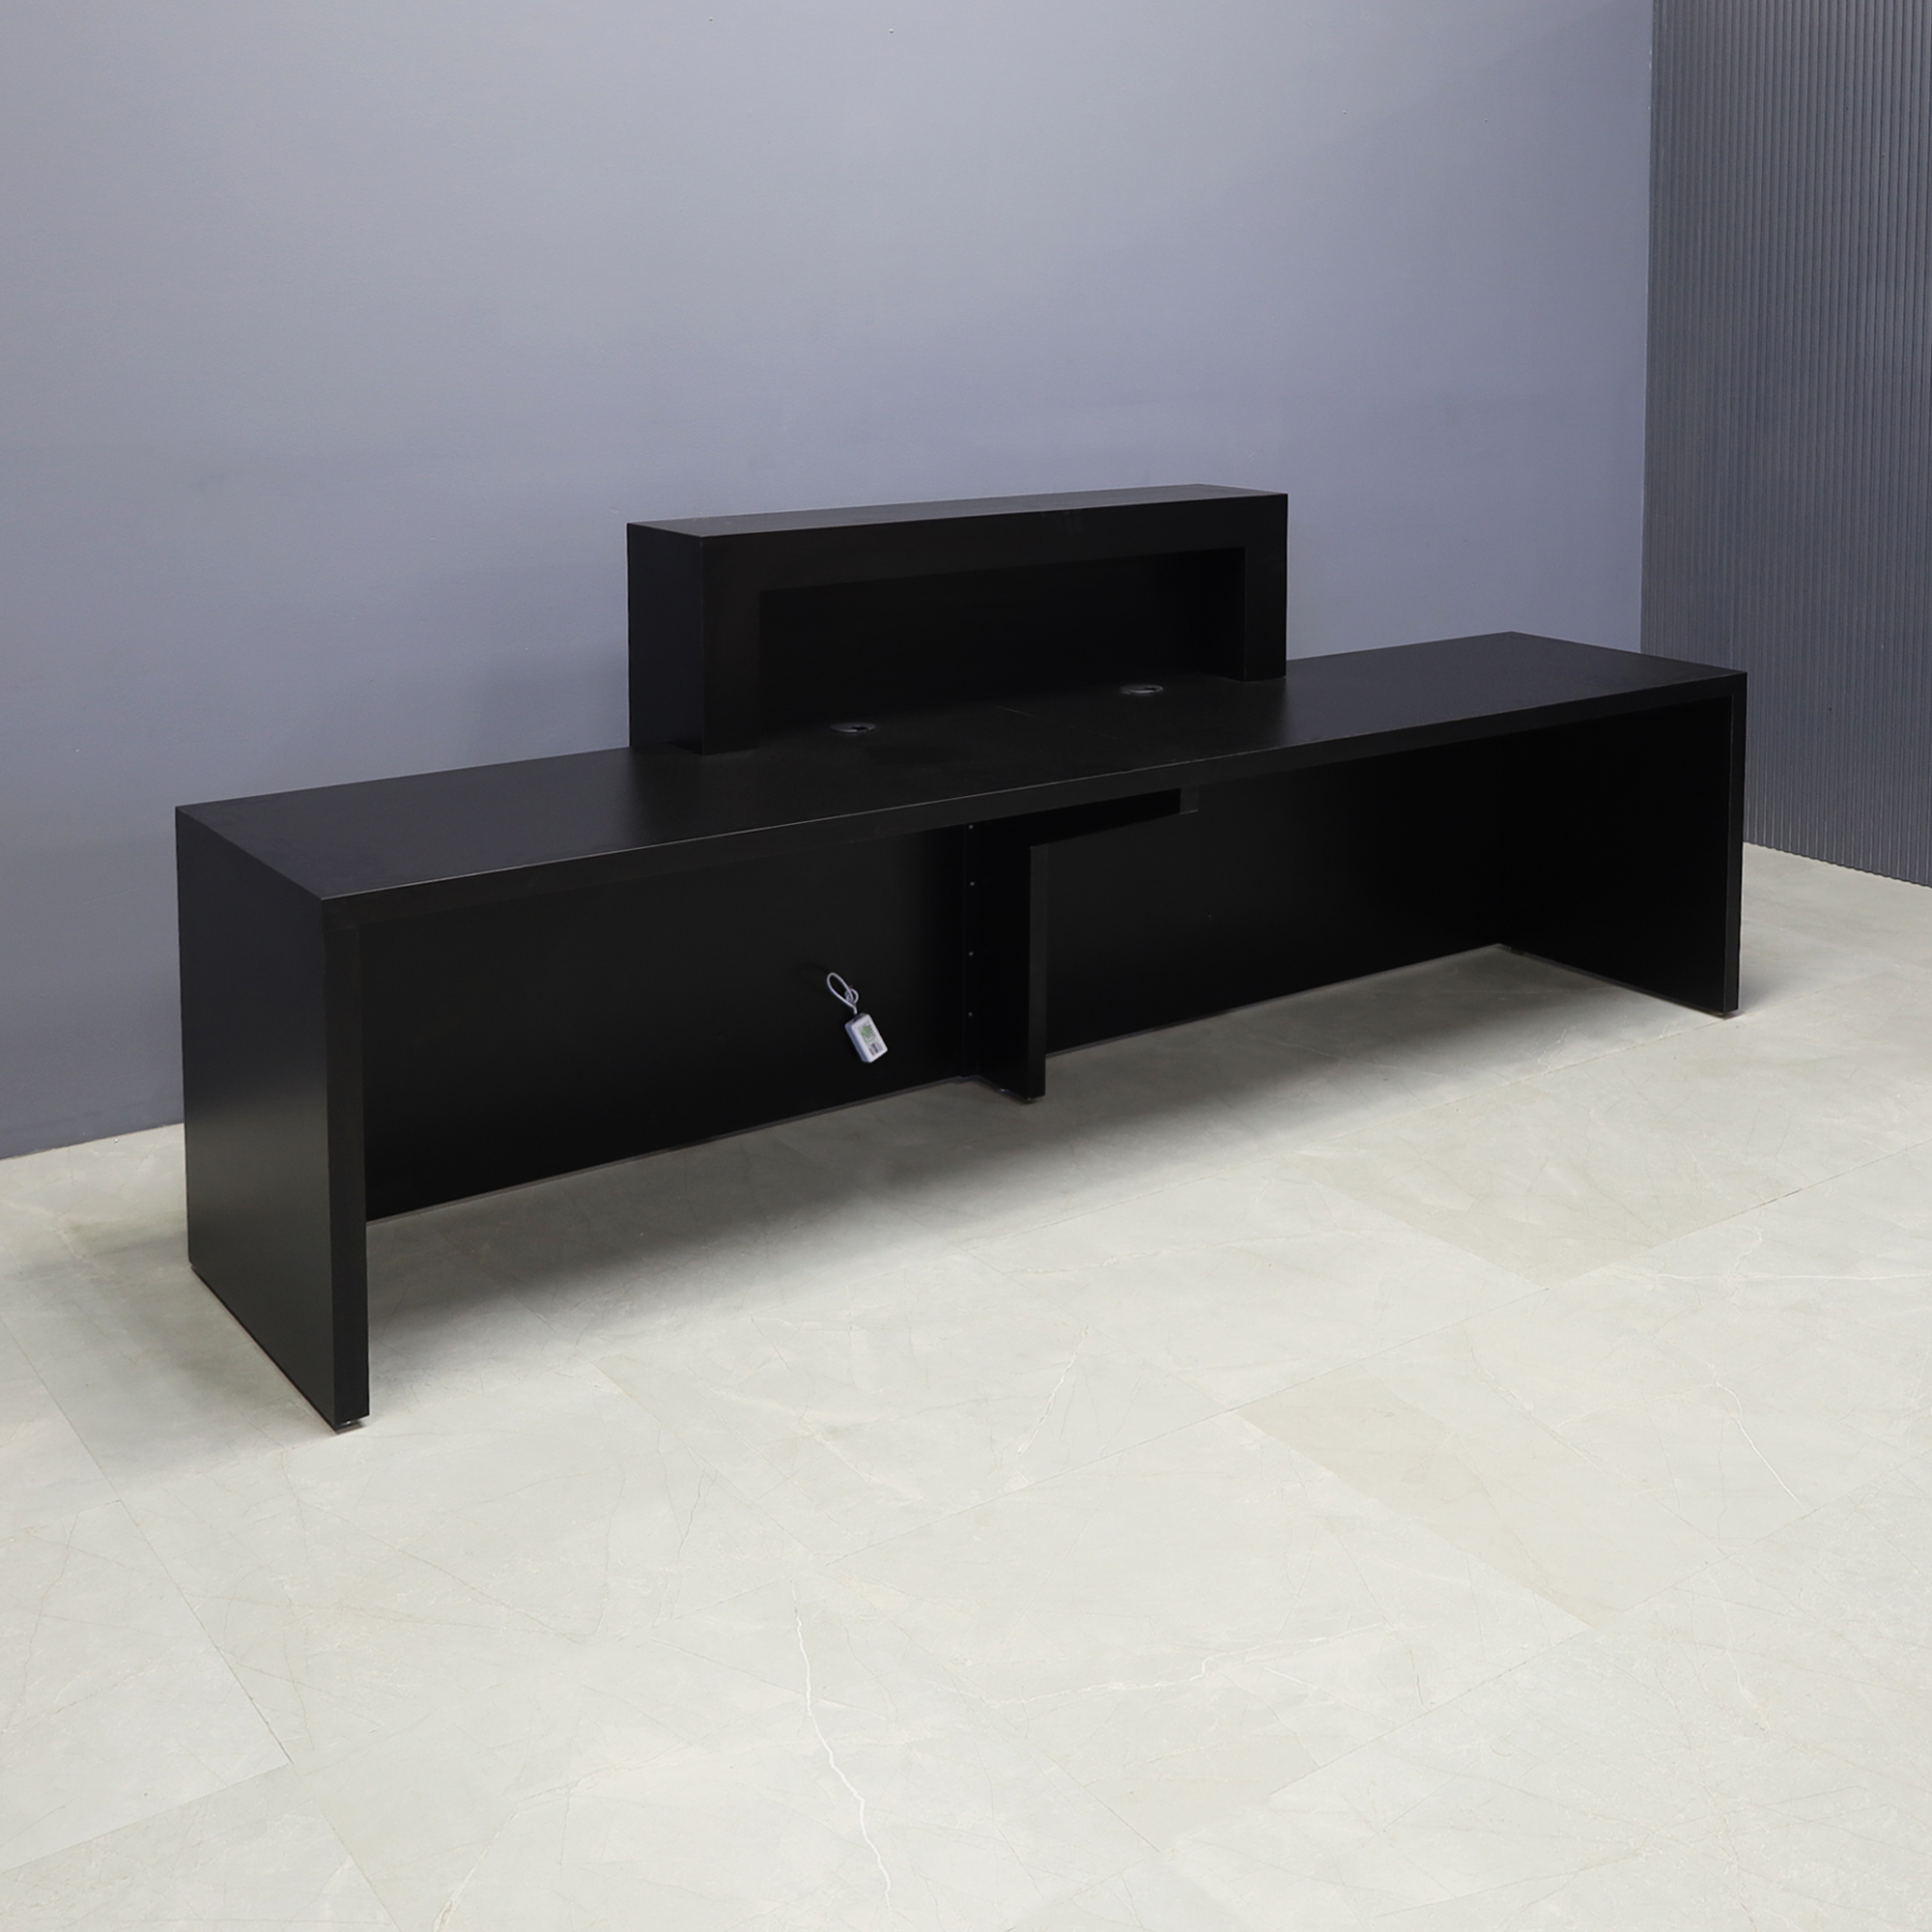 108-inch New York Extra Wide in black matte laminate main desk and recess accent, with multi-colored LED, shown here.